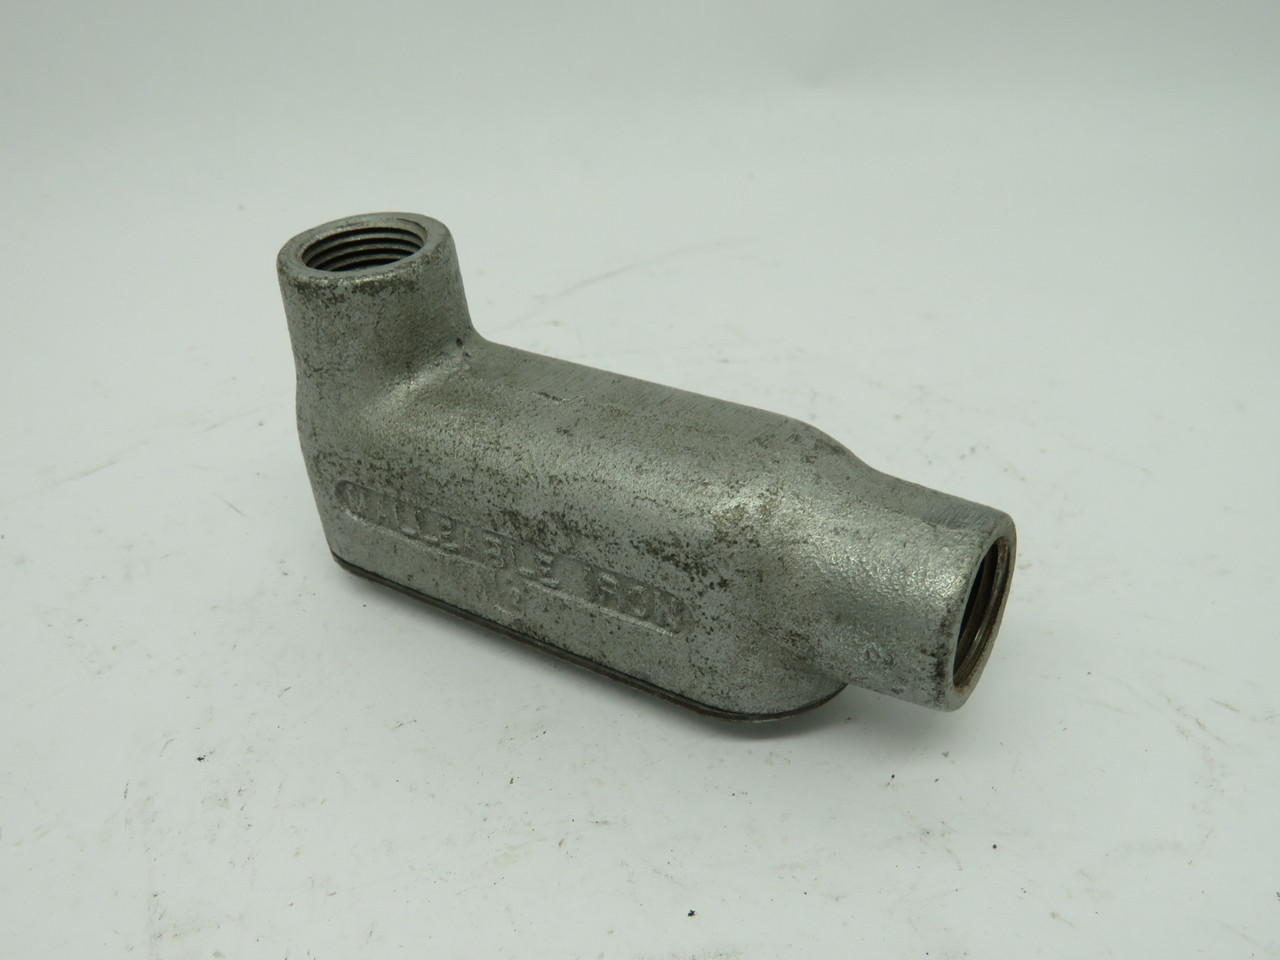 O-Z/Gedney LB-50CG Right Angle Conduit Body w/ Cover 1/2" NO GASKET USED